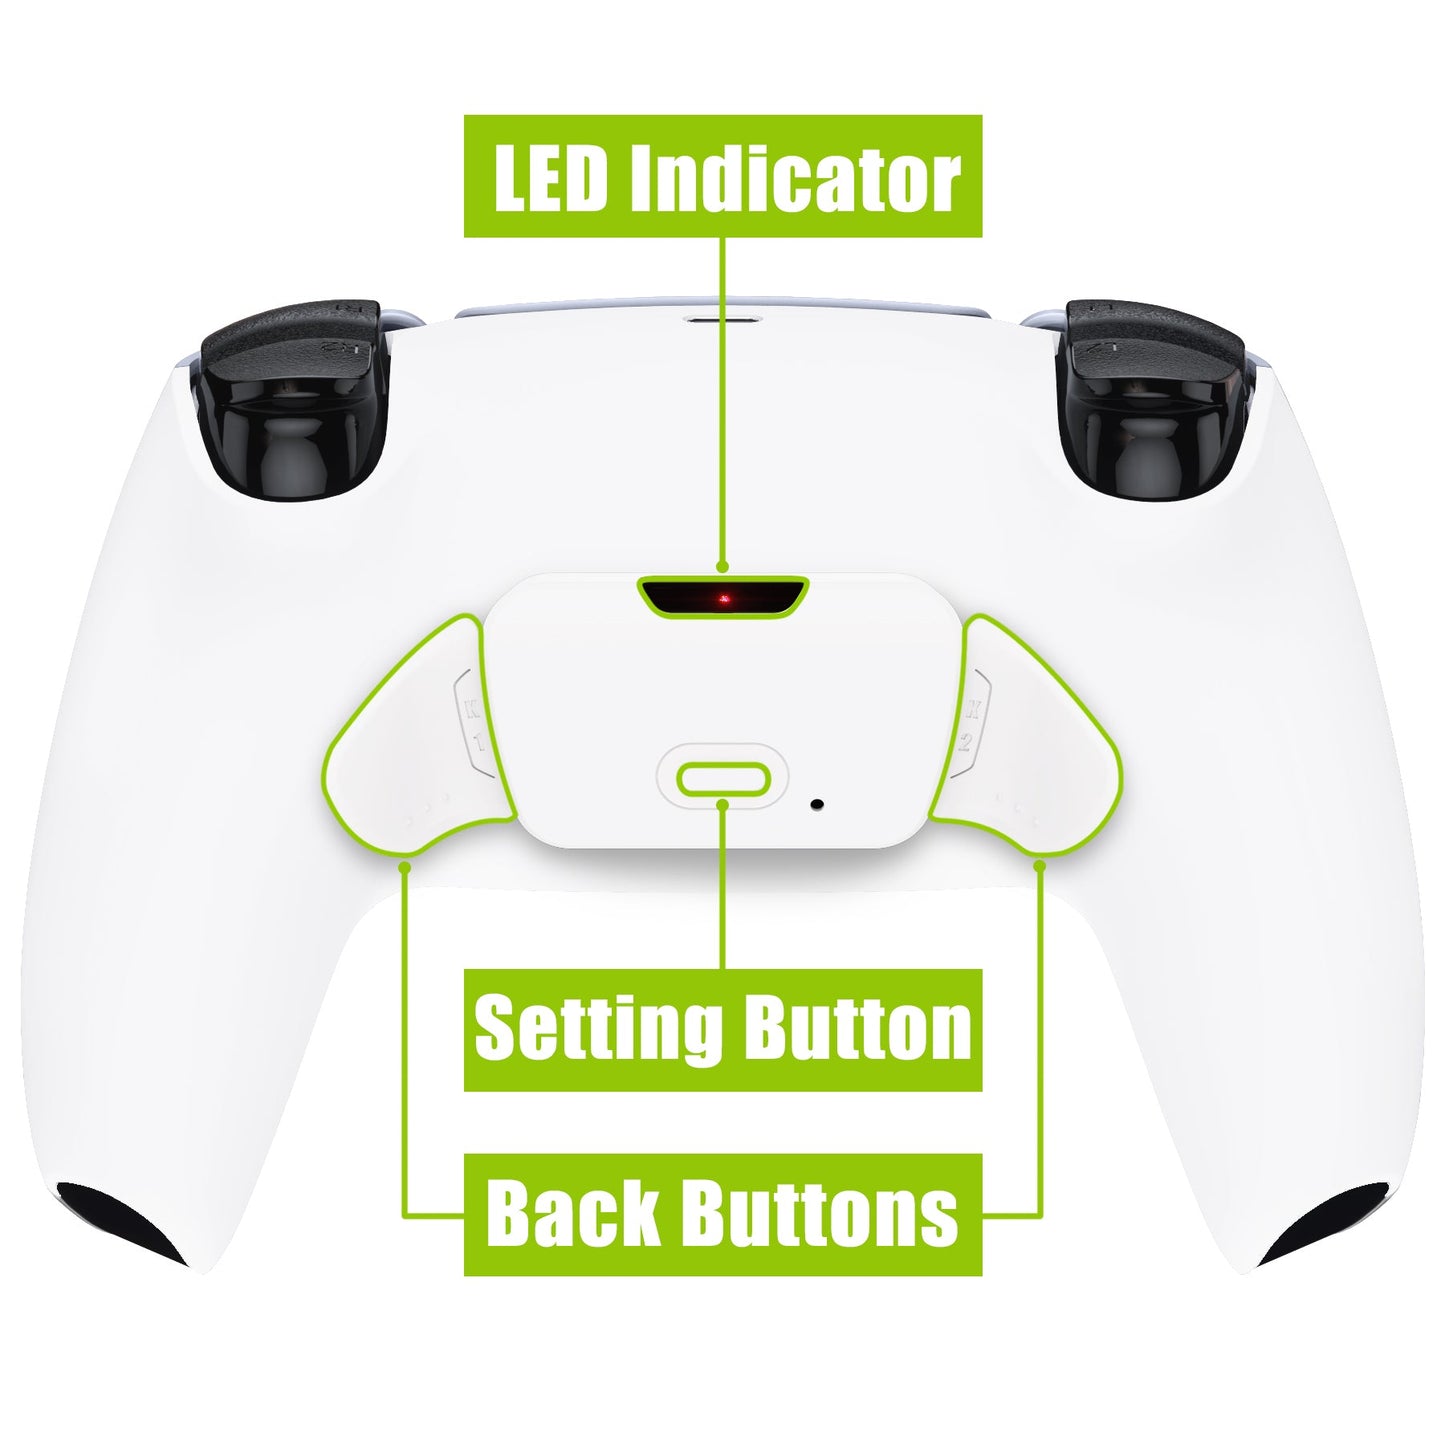 eXtremeRate Retail White Back Paddles Remappable Rise Remap Kit with Upgrade Board & Redesigned Back Shell & Back Buttons Attachment for ps5 Controller BDM-010 & BDM-020 - XPFP3008G2